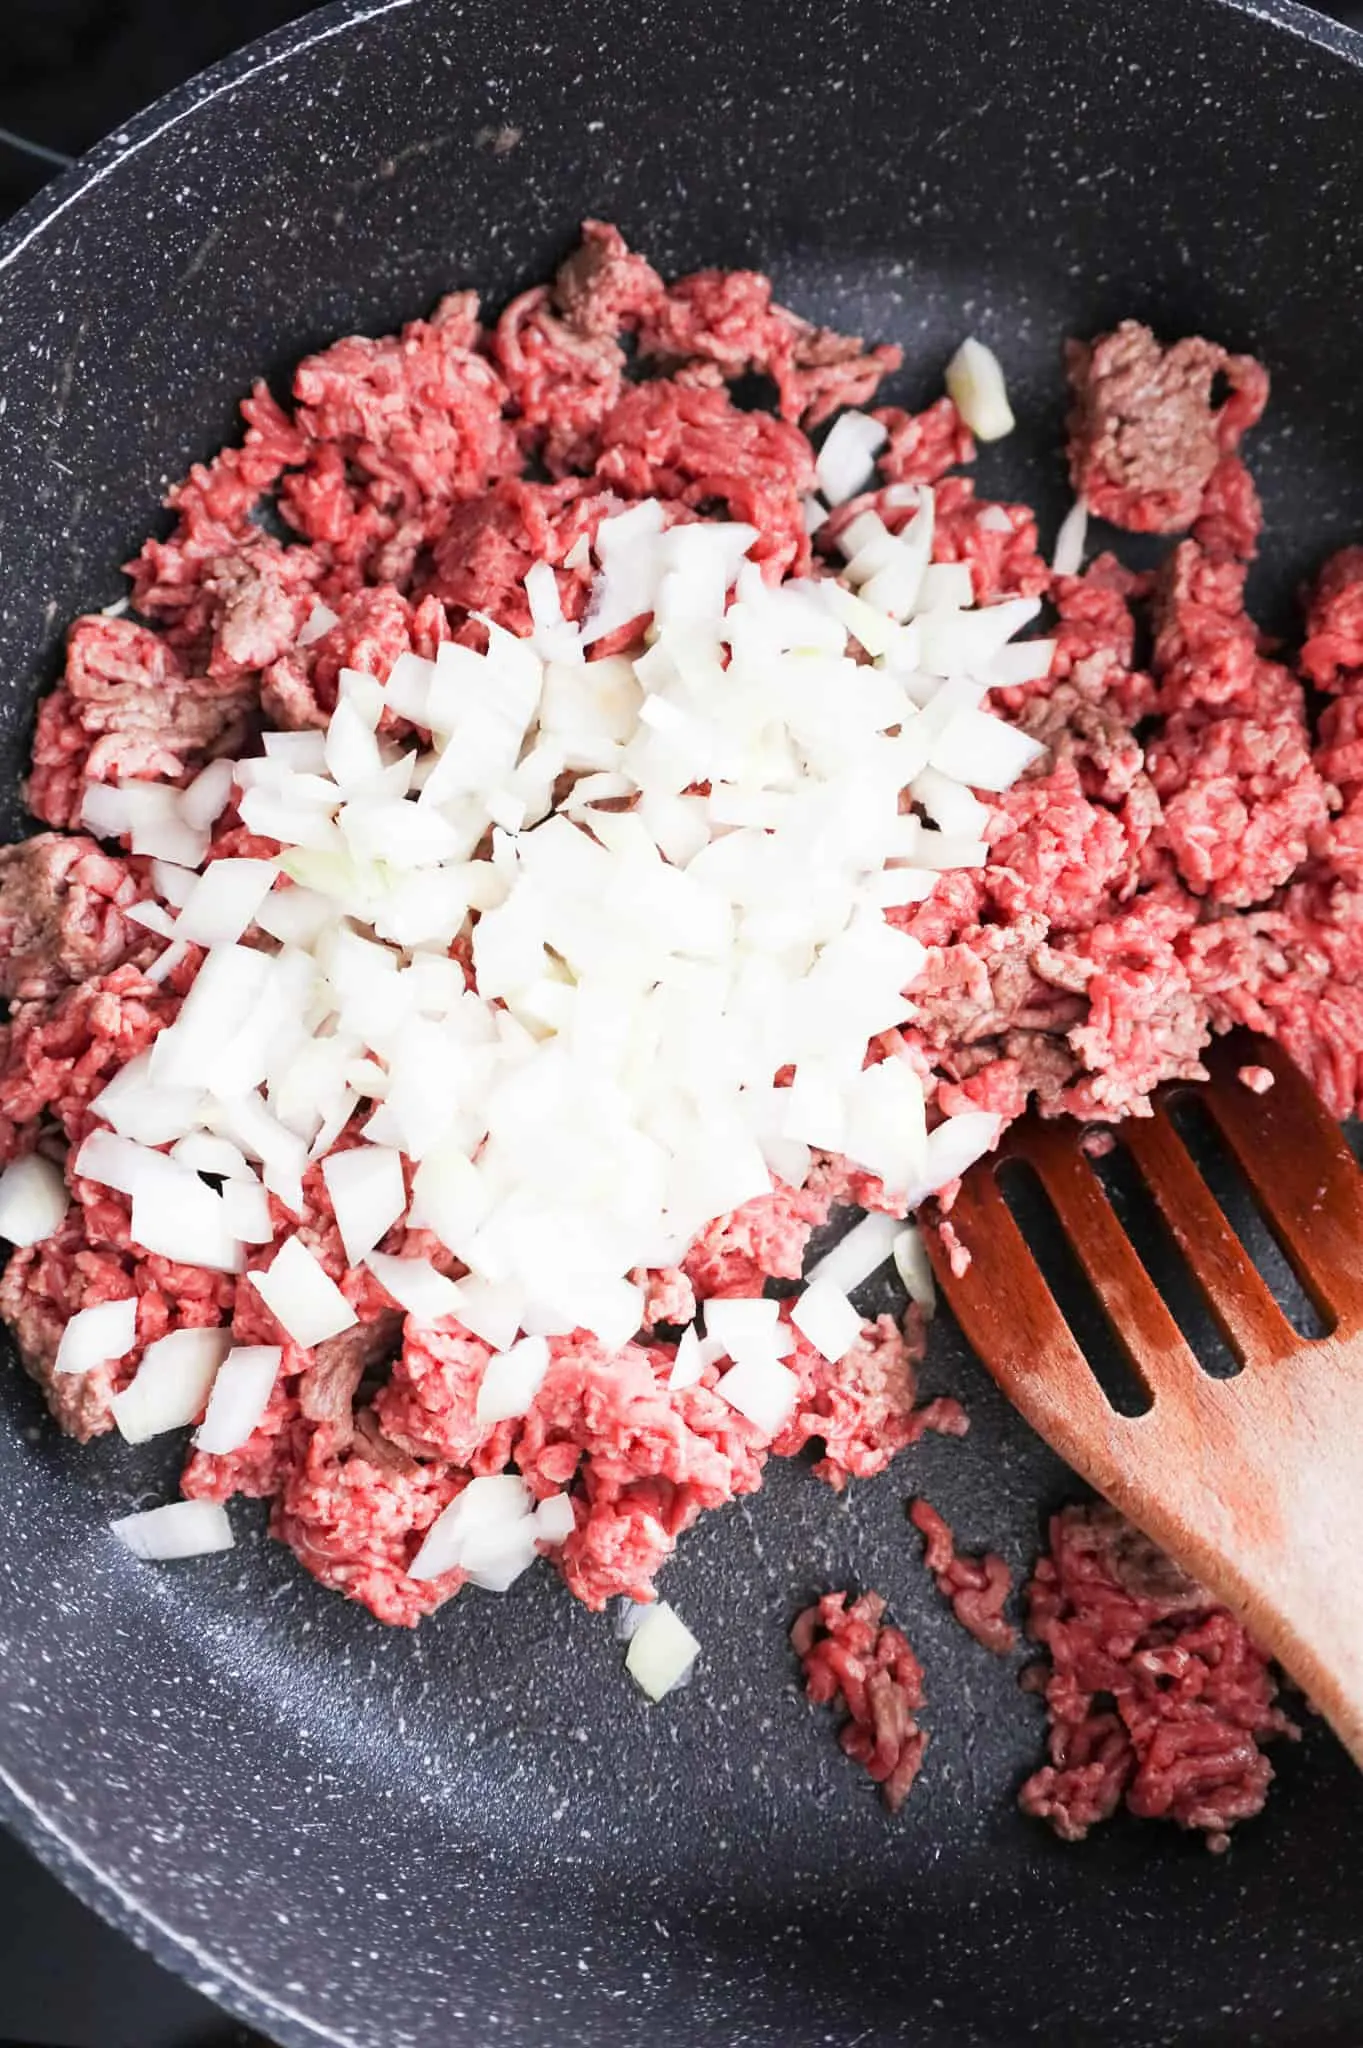 diced onions added to a skillet with ground beef